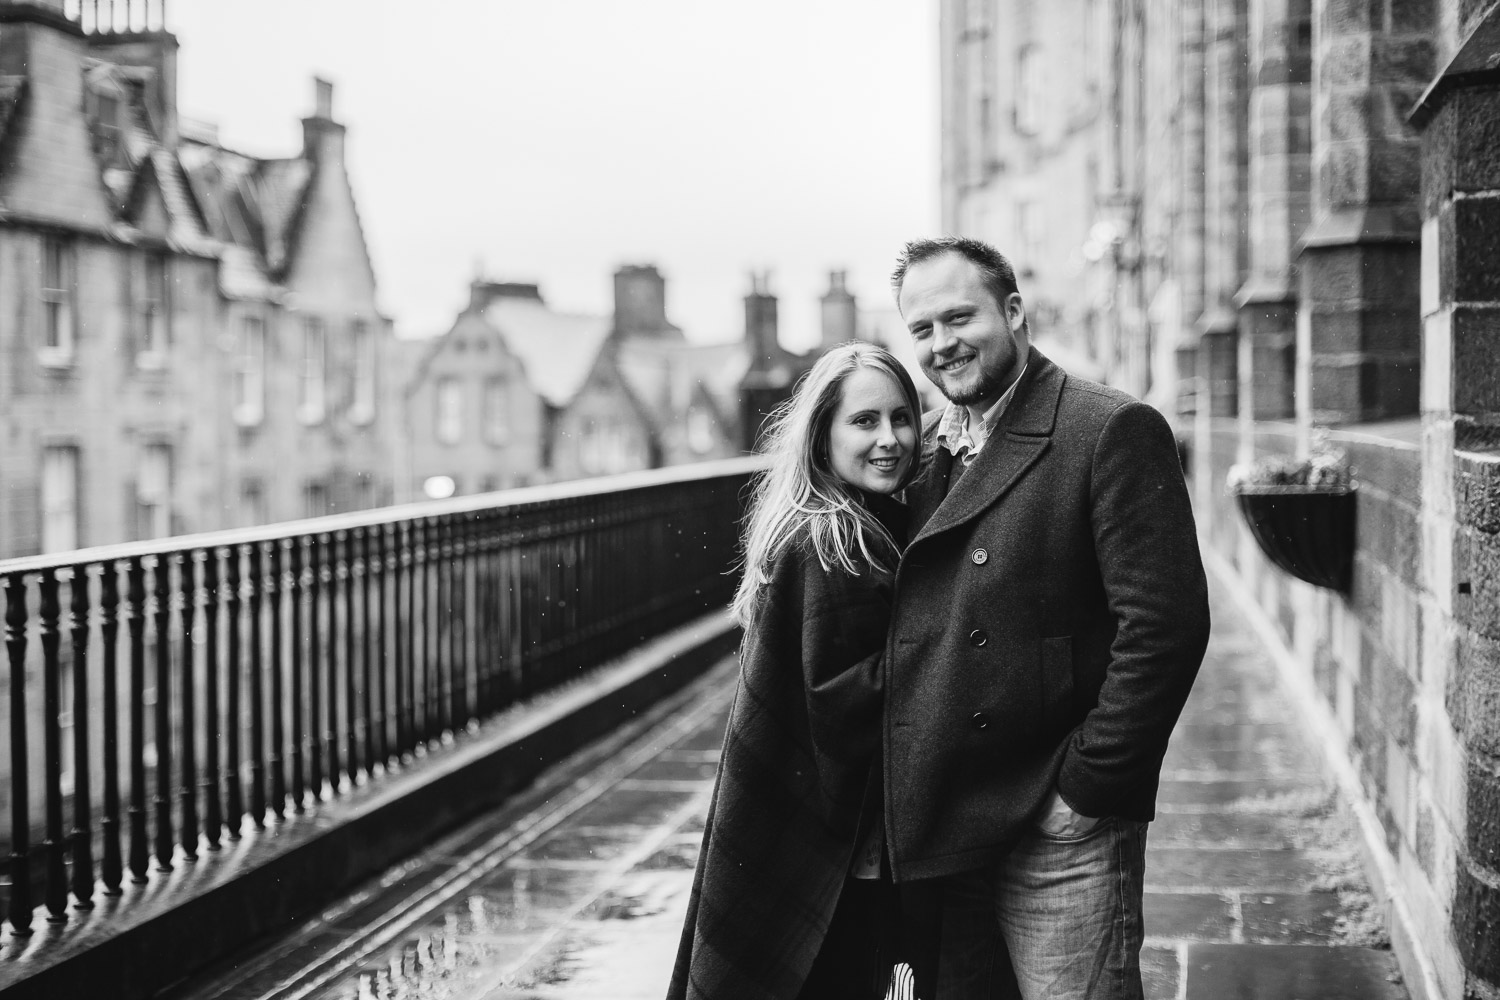 Moody spring engagement session in Old Town of Edinburgh, Scotland. Royal Mile rainy engagement.